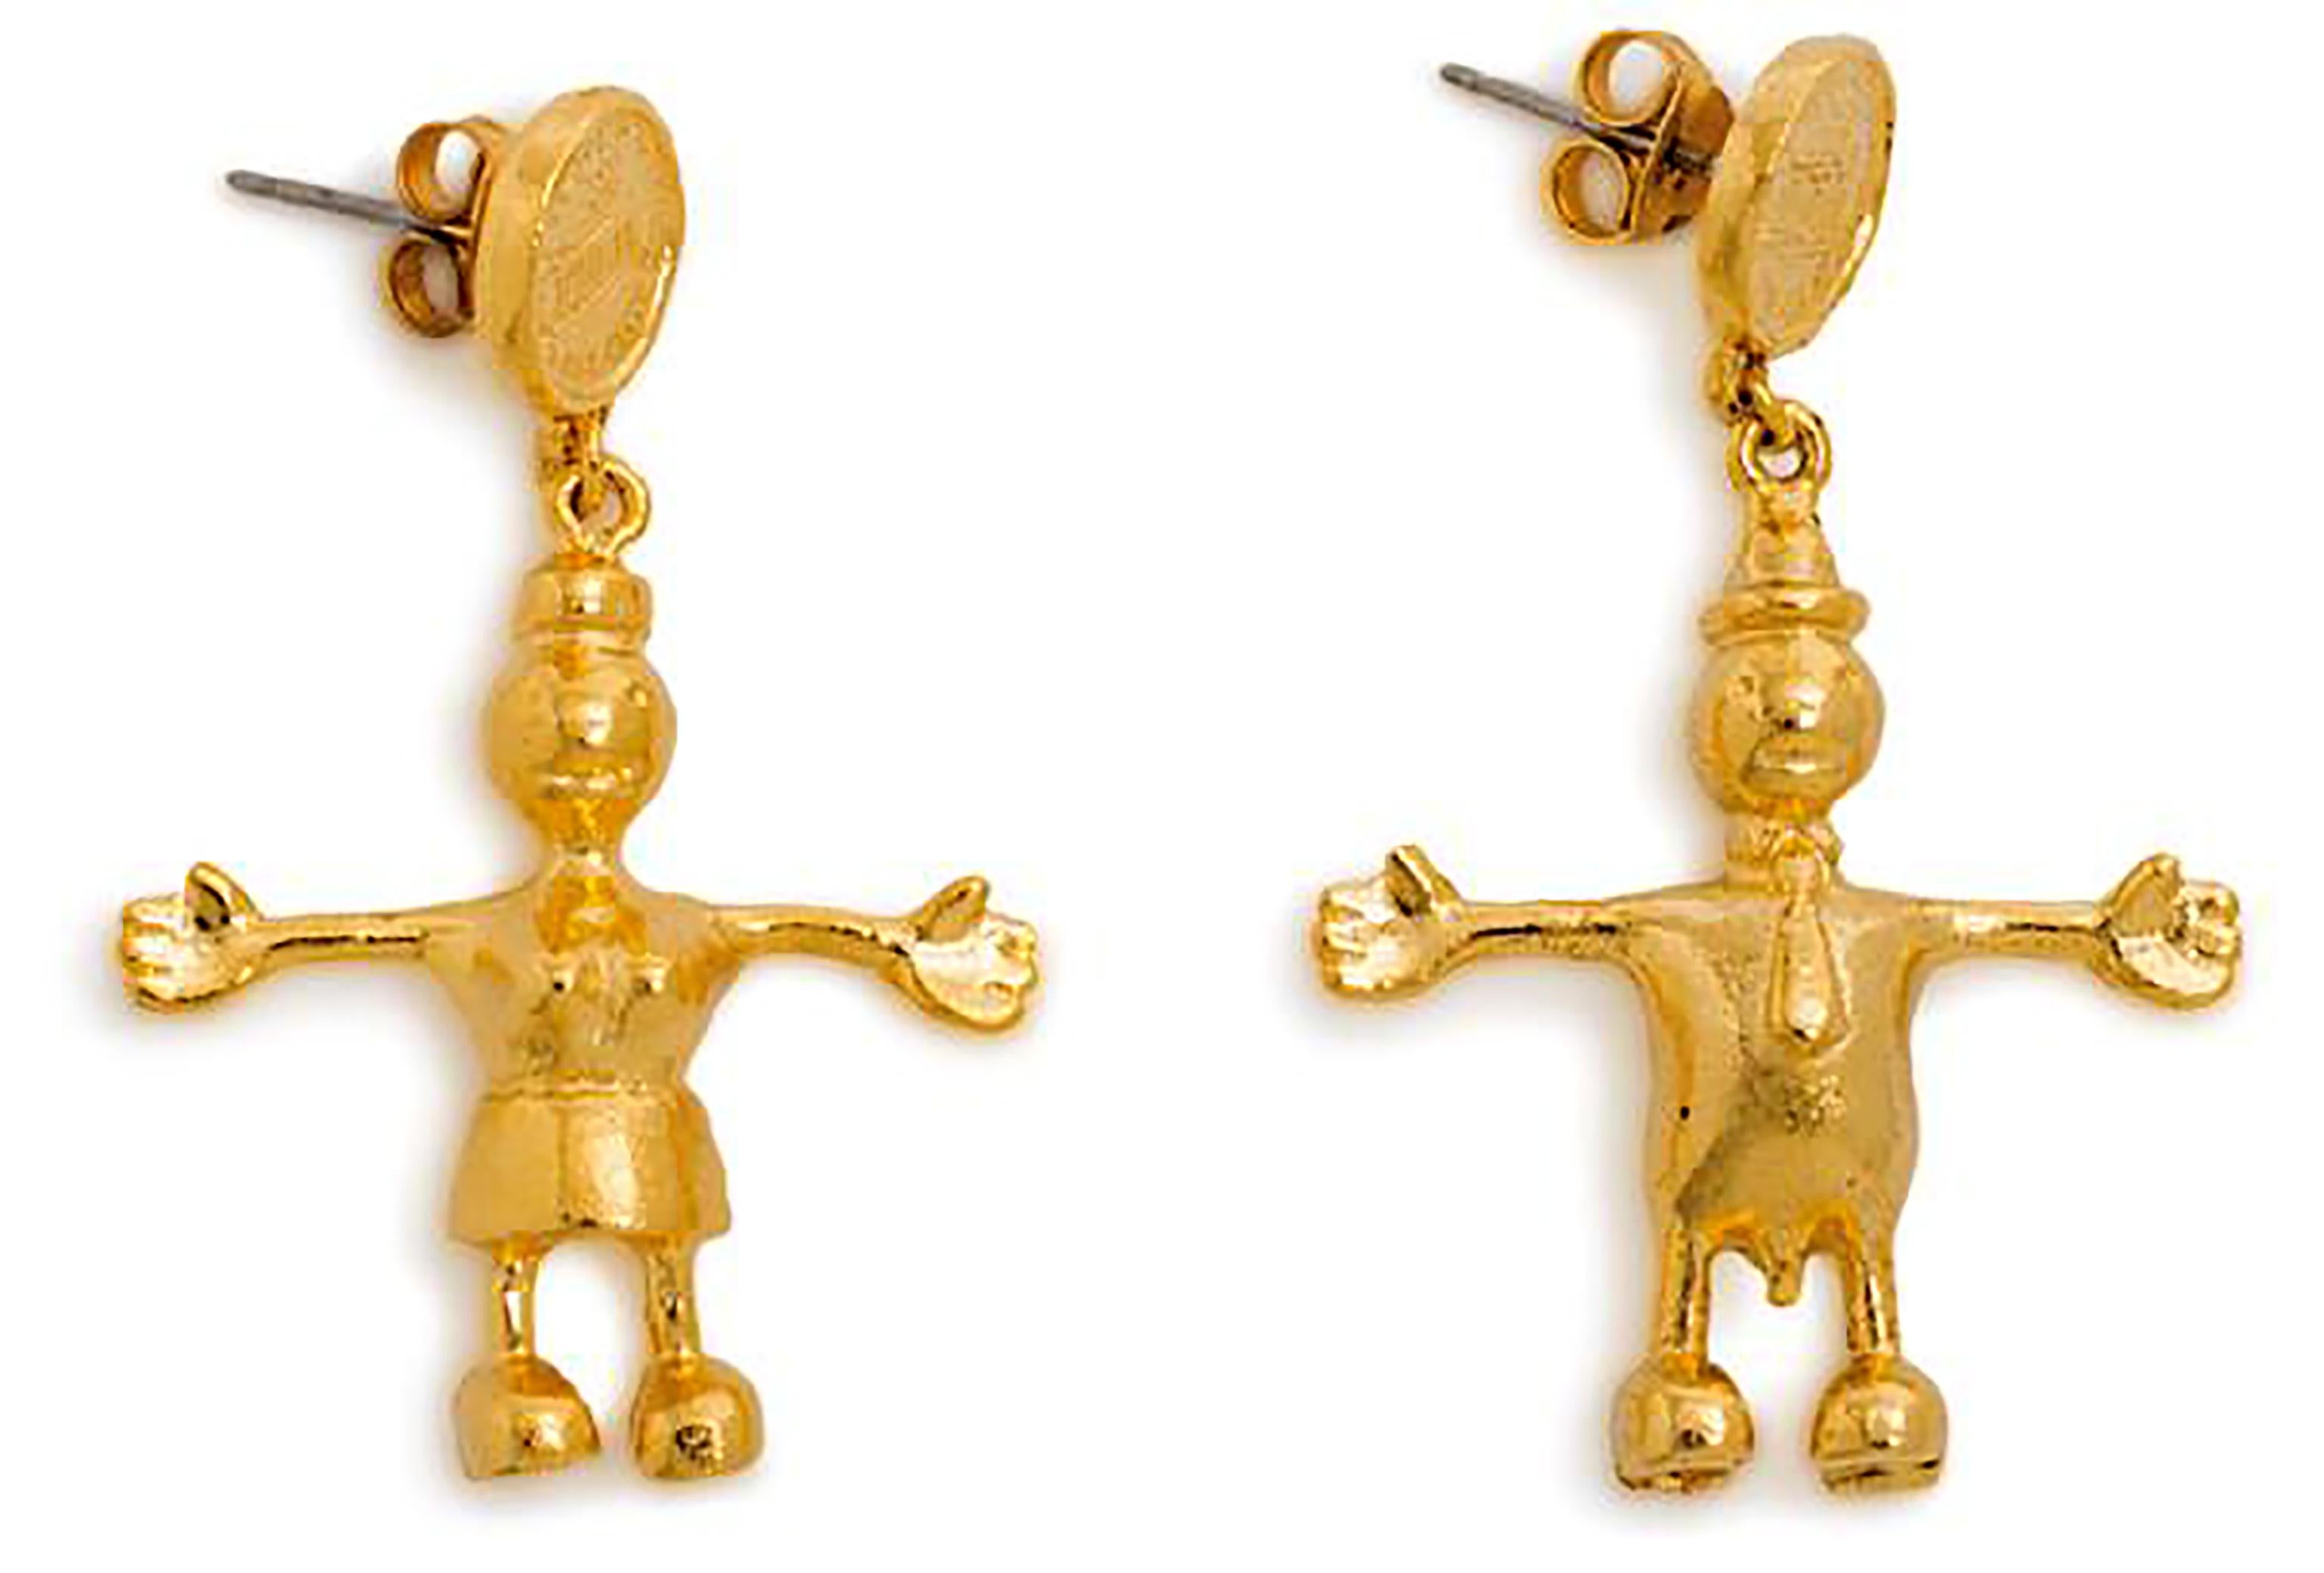 Gold-Plated Earrings - Art by Tom Otterness